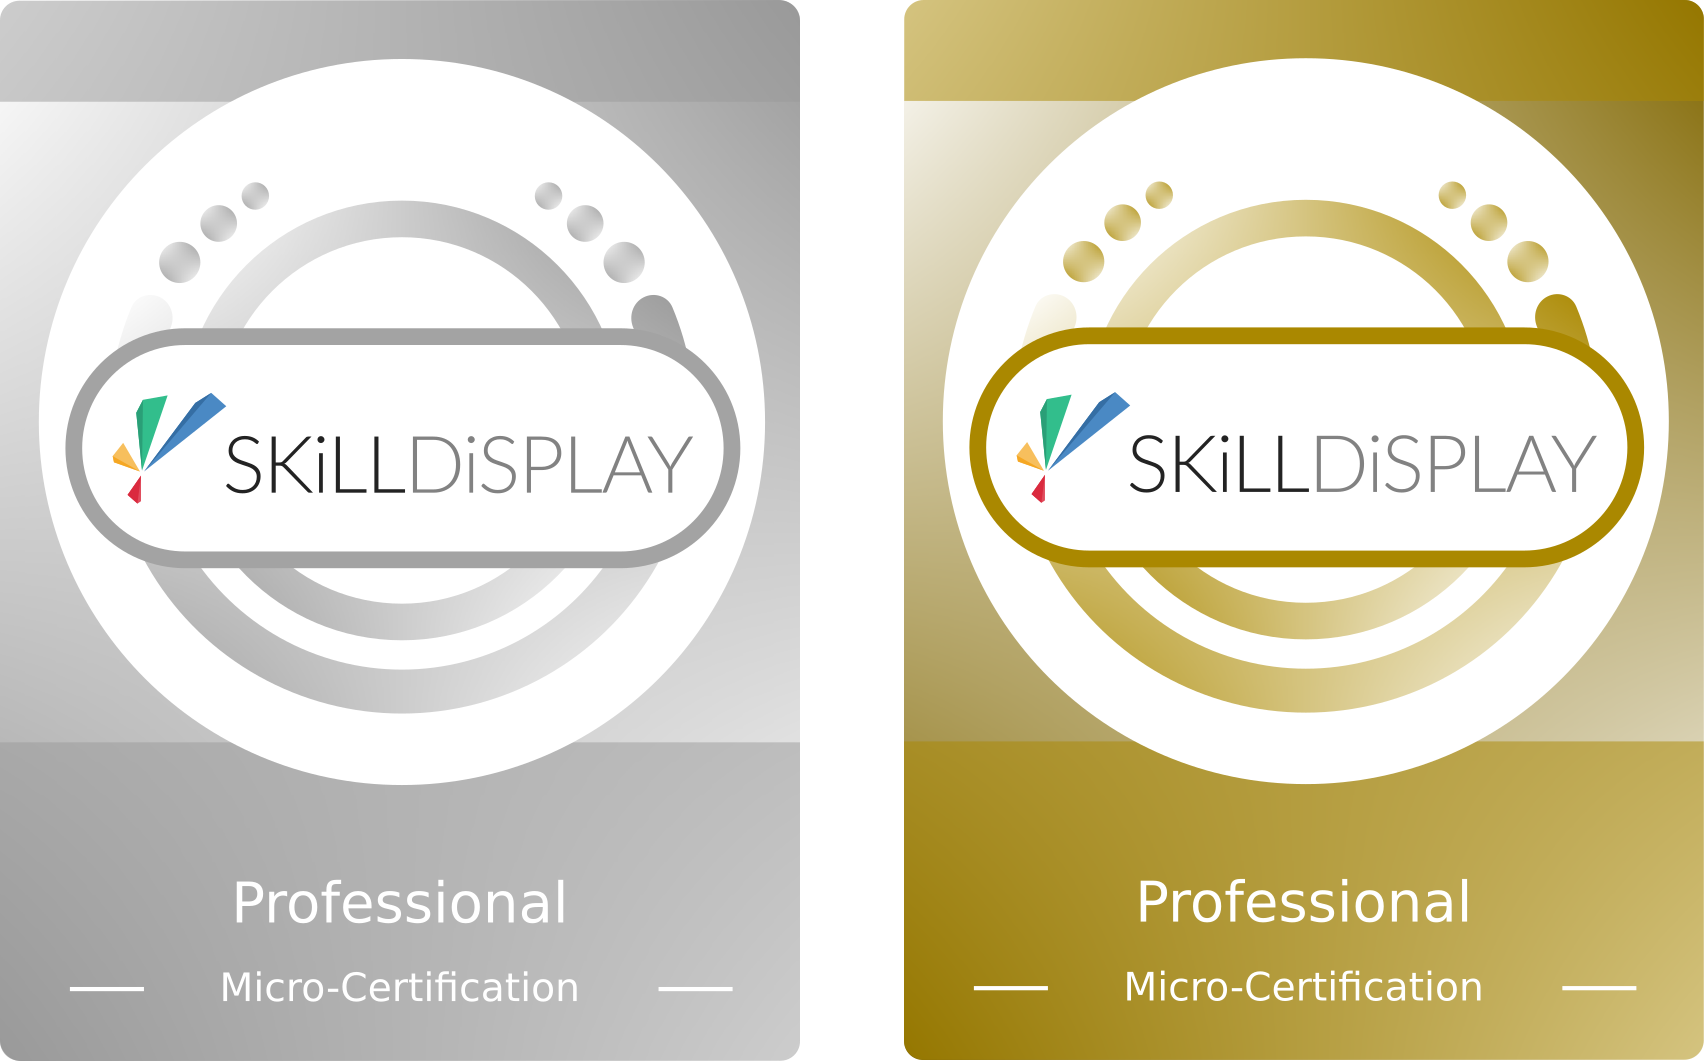 Silver and Gold Micro-Certification Badge for the SkillDisplay Certified Professional, meaning the user has verified training or practical experience (silver) or both (gold) in addition to certification